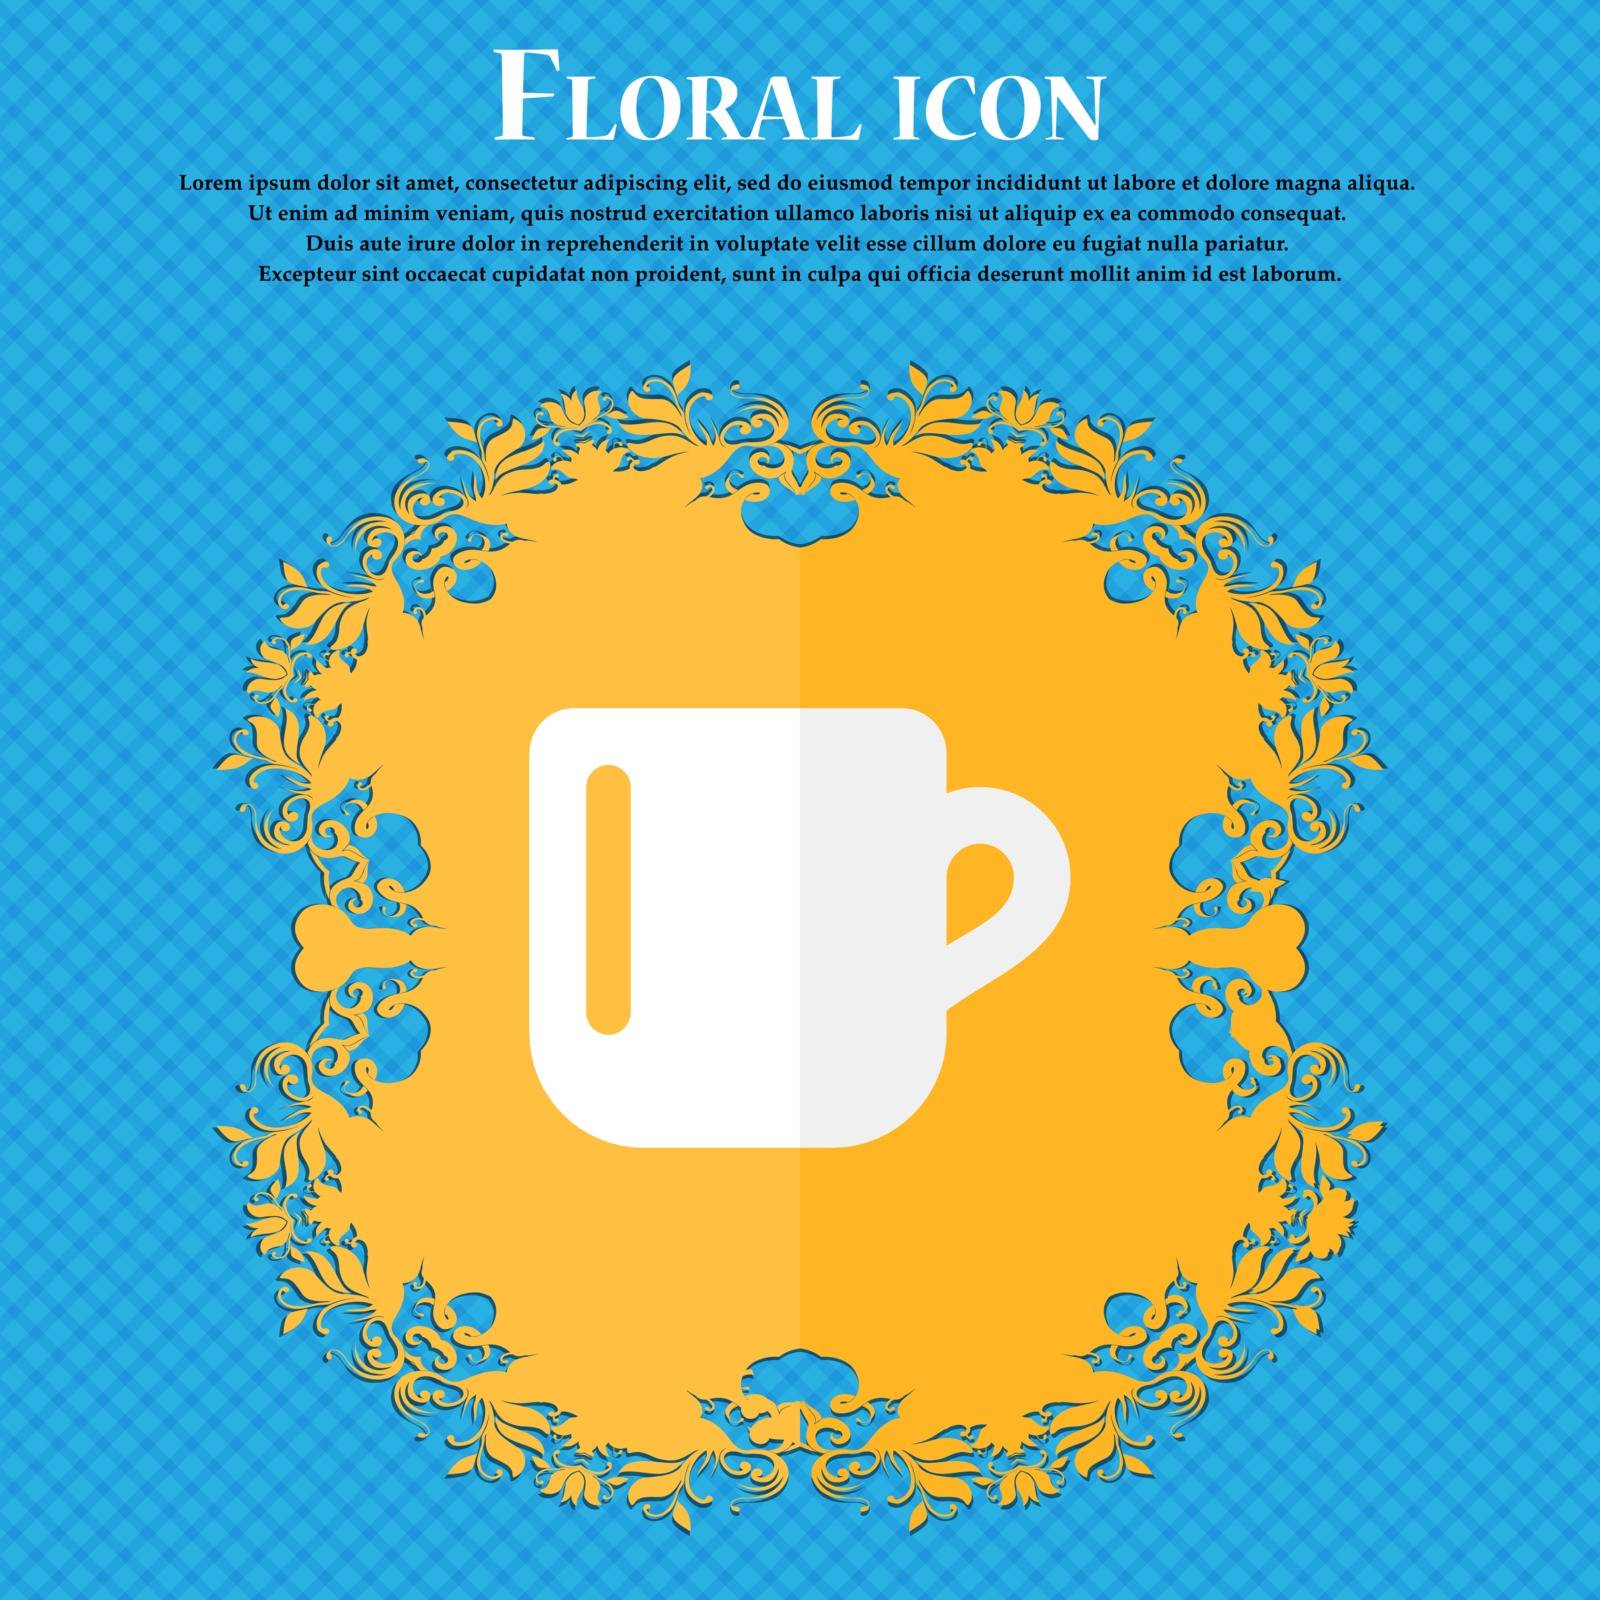 cup coffee or tea . Floral flat design on a blue abstract background with place for your text. Vector illustration